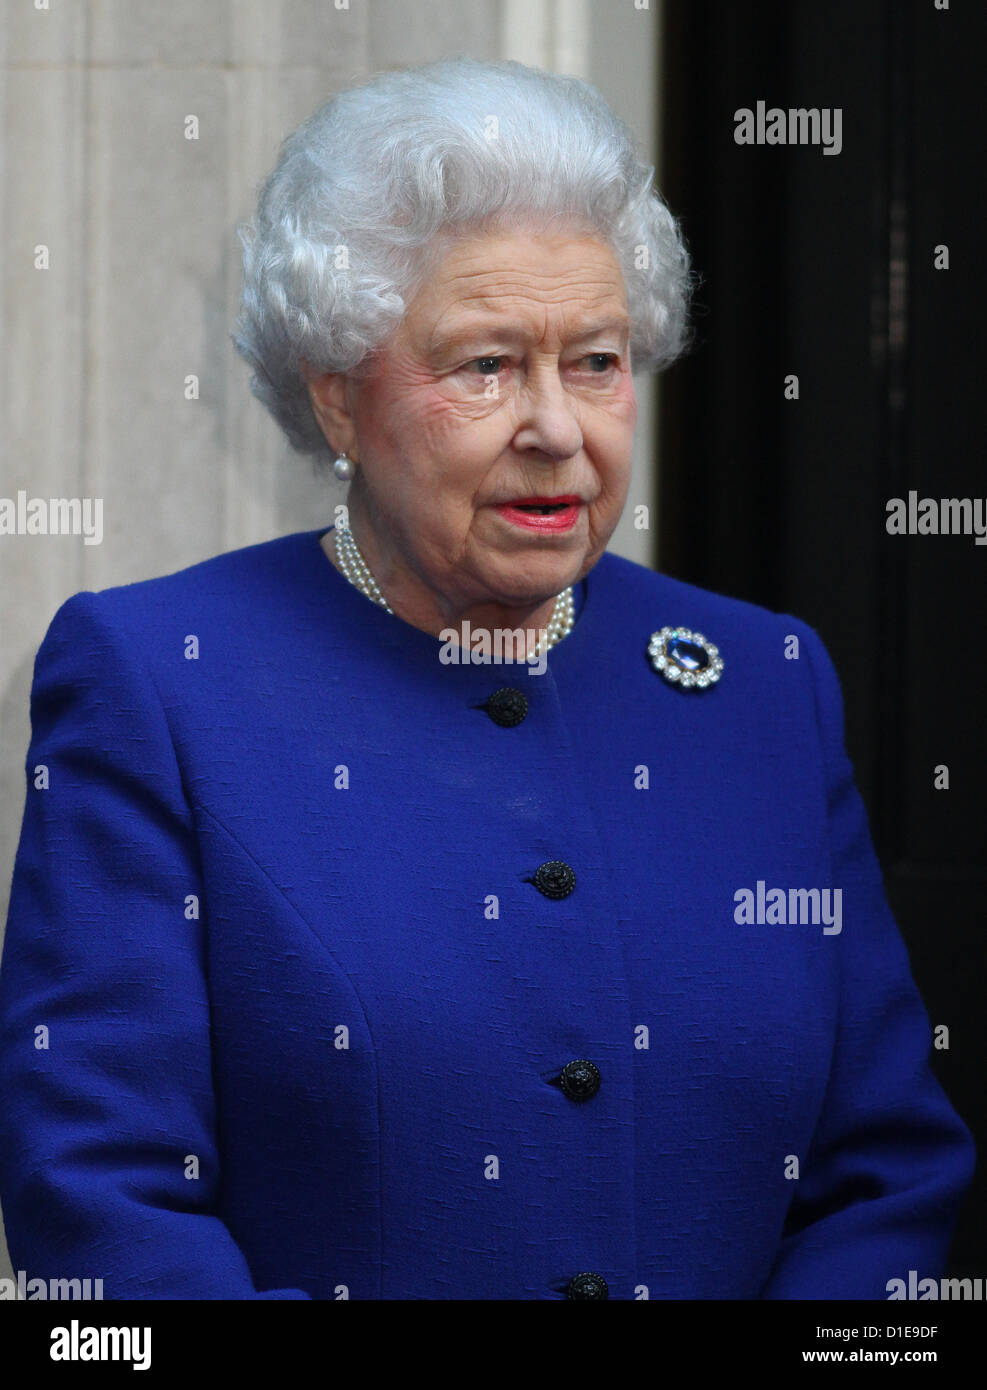 THE QUEEN THE ROYAL FAMILY THE QUEEN VISITS NUMBER 10 DOWNING STREET, LONDON LONDON, ENGLAND, UK 18 December 2012 DIO58000   ROYAL VISITS NUMBER 10, WHERE SHE RECEIVES A GIFT TO MARK THE DIAMOND JUBILEE AND ATTENDS CABINET AS AN OBSERVER. Stock Photo